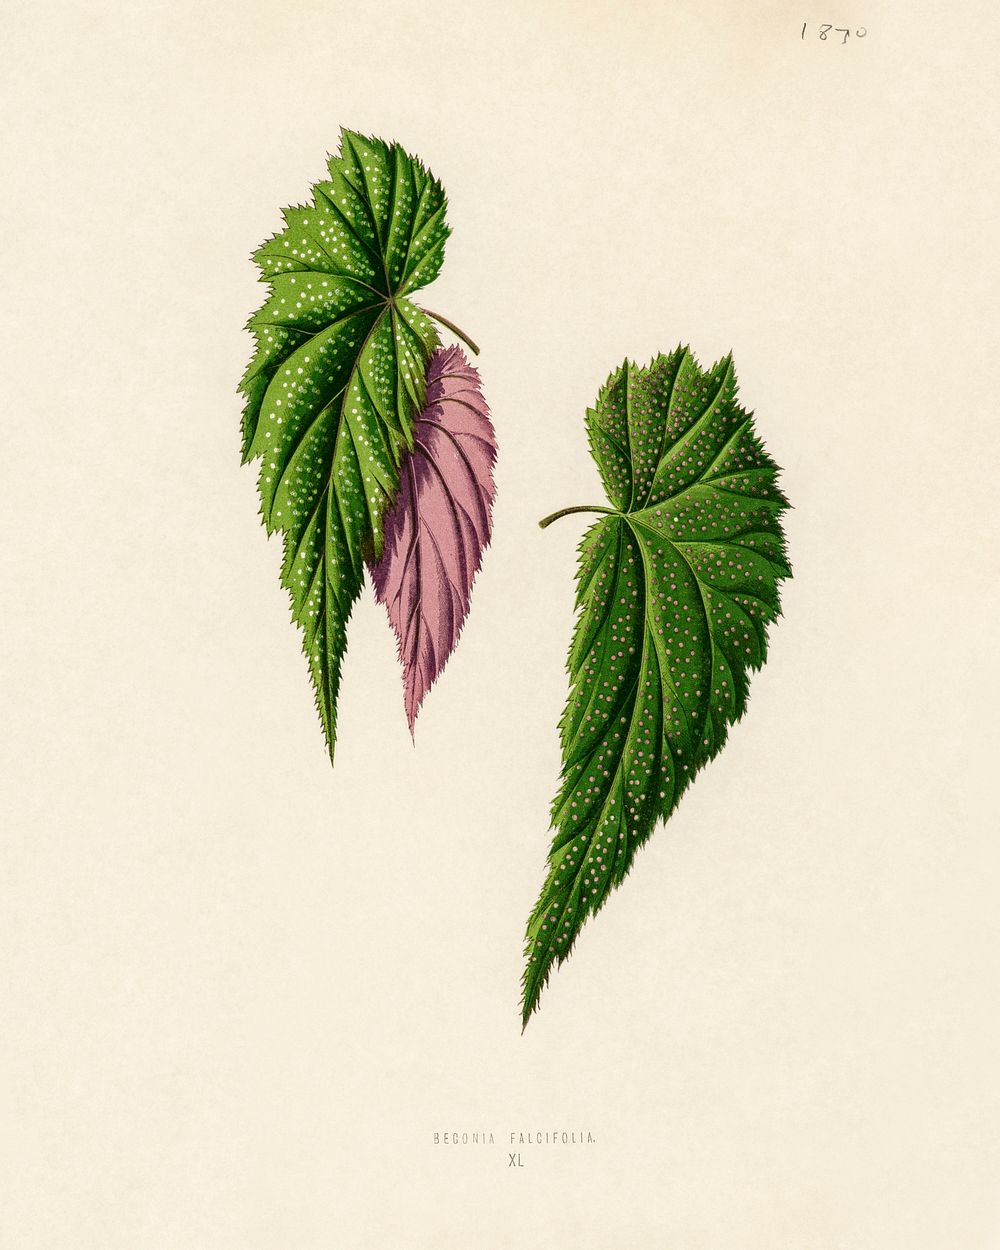 Begonia Falcifolia. Digitally enhanced from our own 1929 edition of New and Rare Beautiful-Leaved Plants by Benjamin Fawcett…